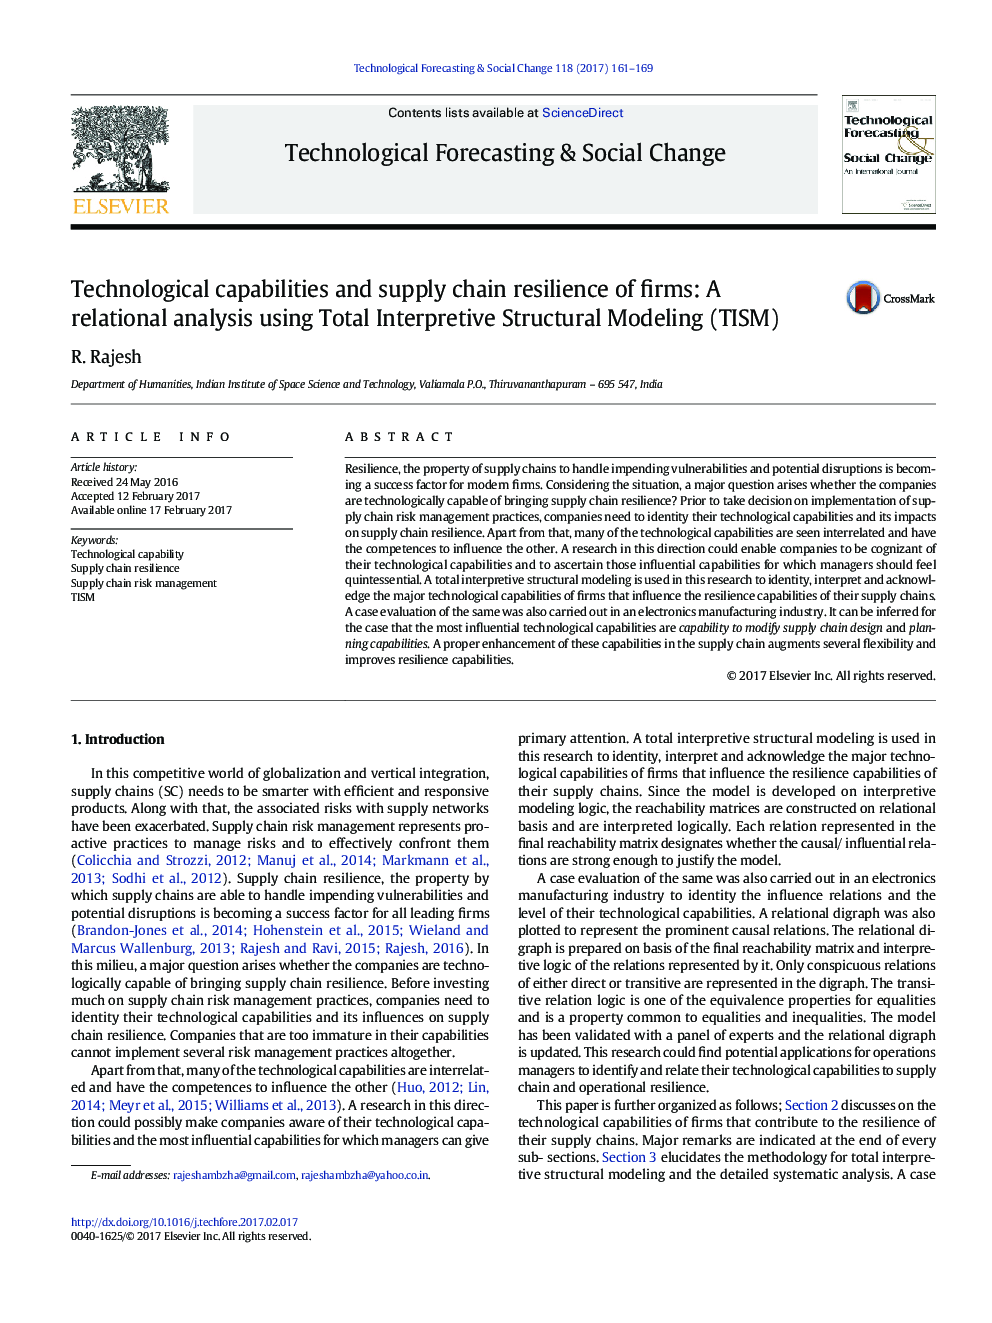 Technological capabilities and supply chain resilience of firms: A relational analysis using Total Interpretive Structural Modeling (TISM)